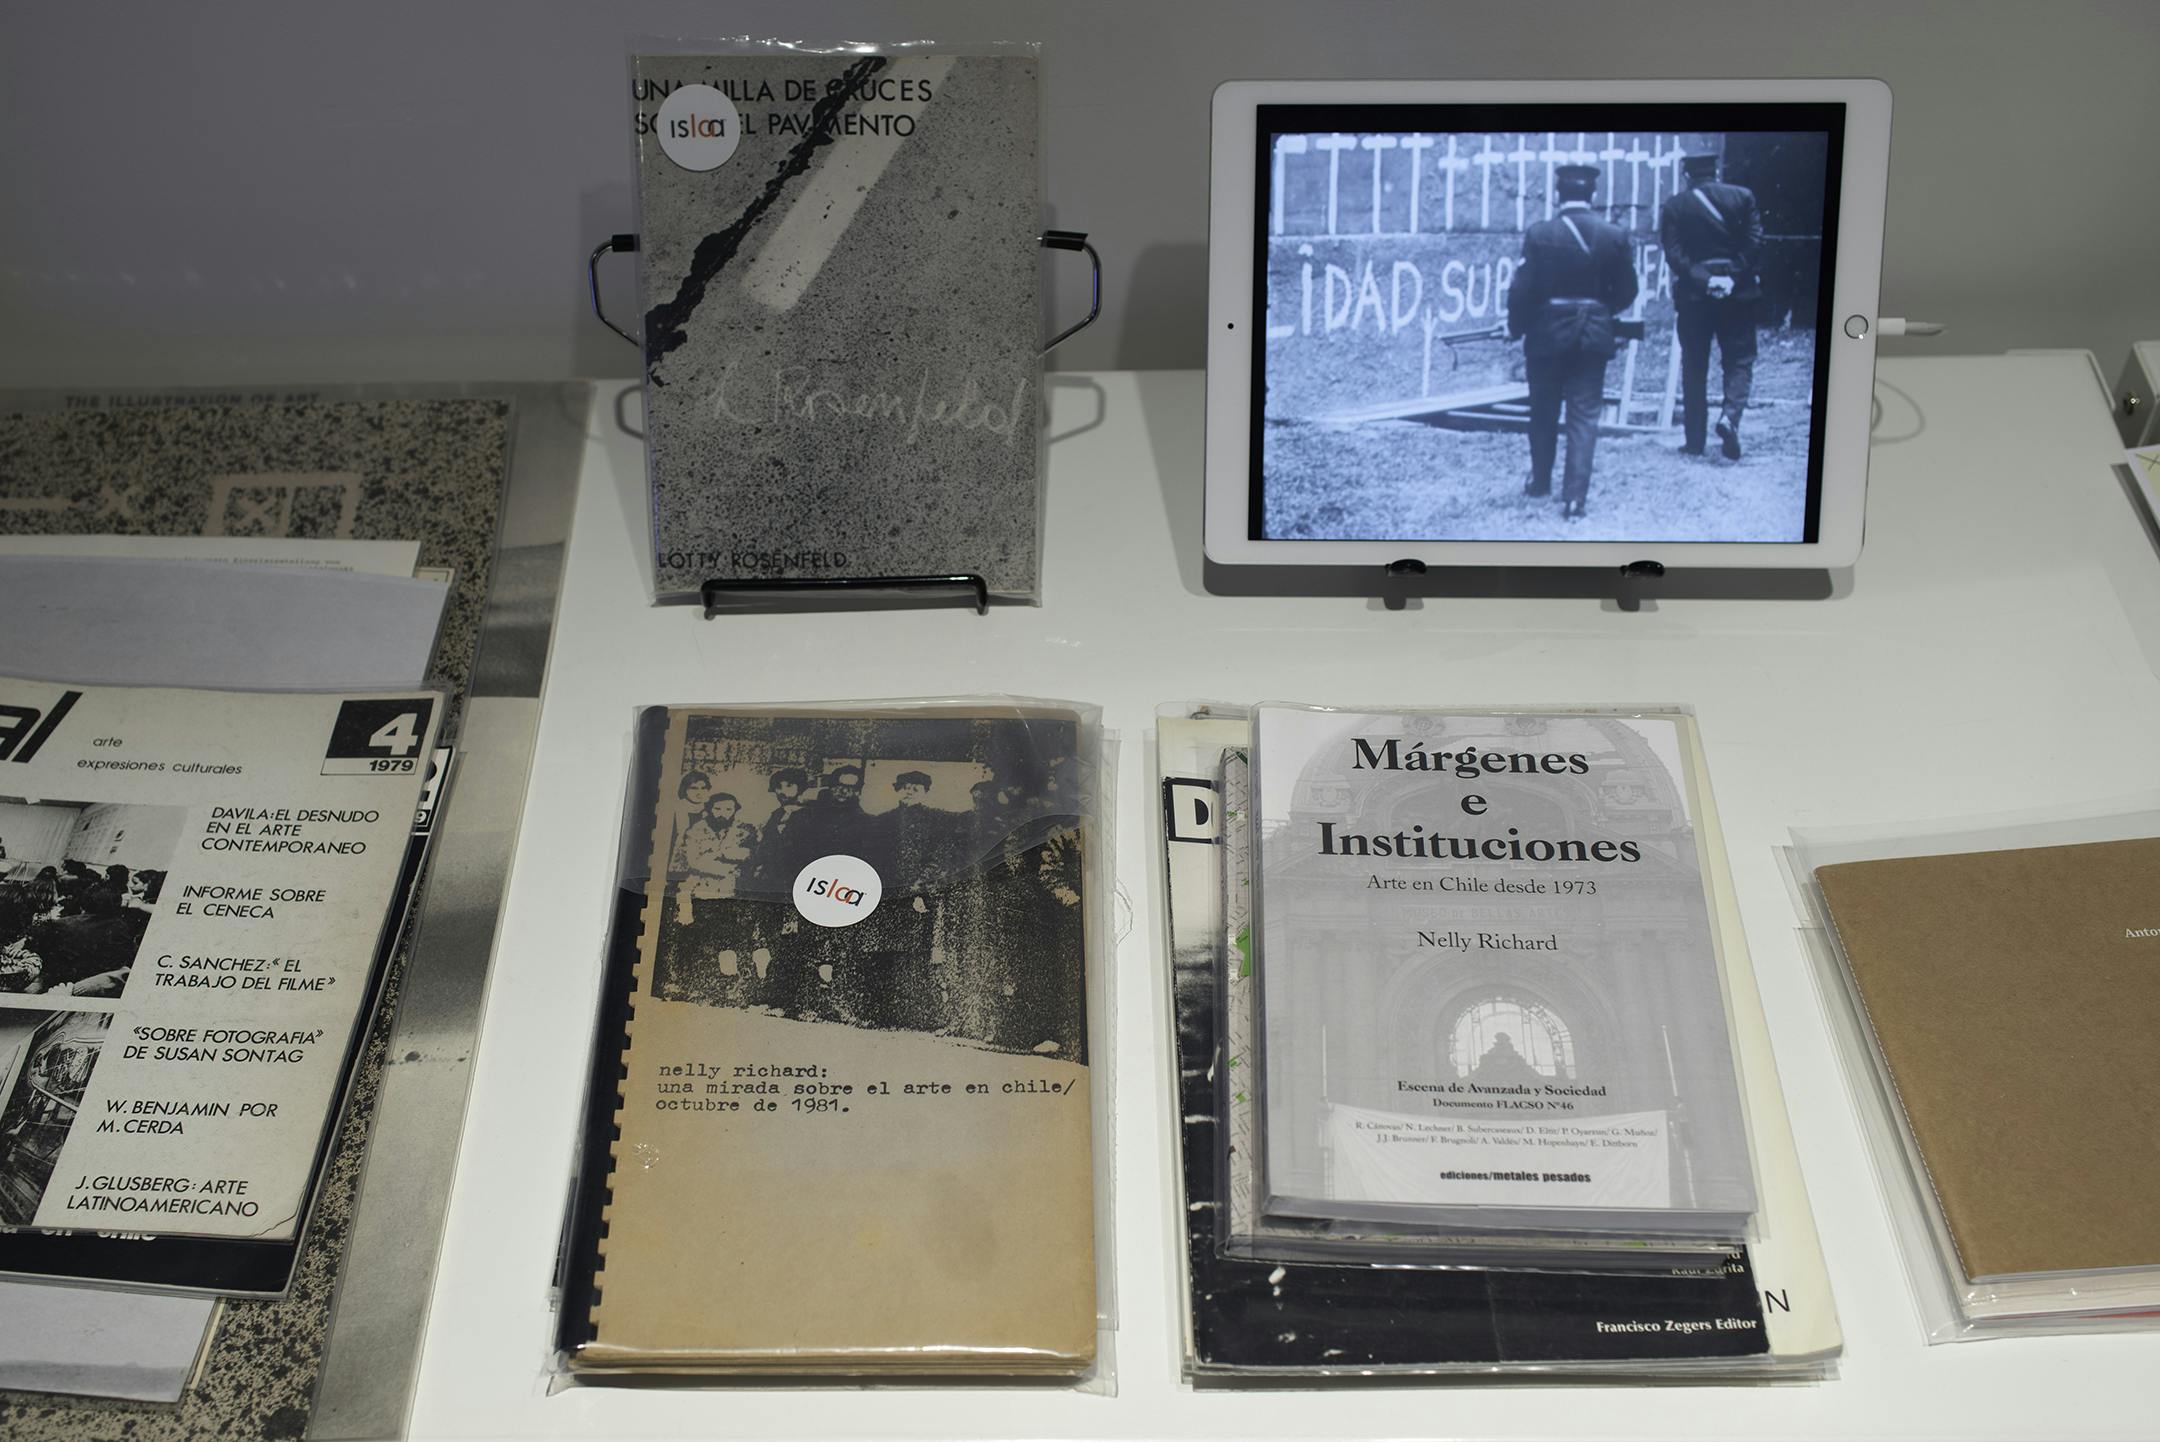 Stacks of original documents and booklets next to a smart tablet playing video.